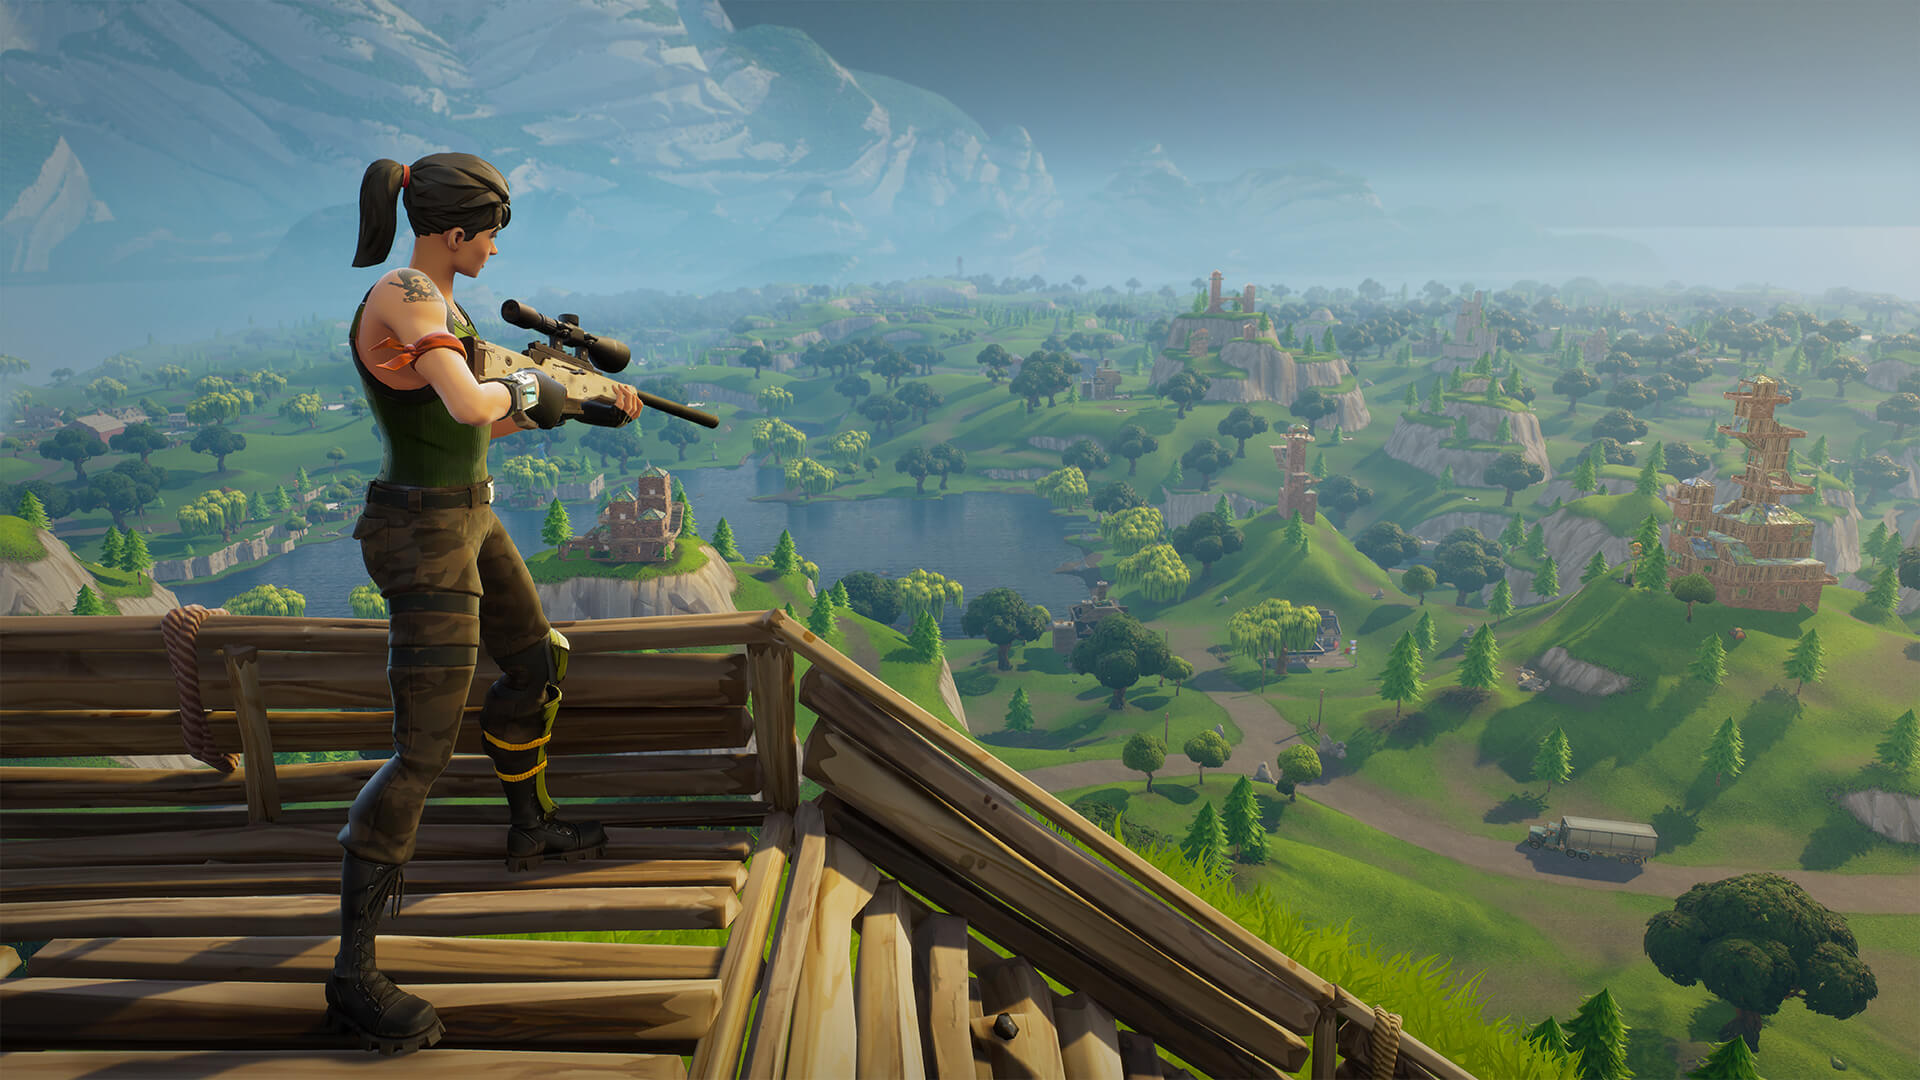 Fortnite release date for Android: All the answers to your questions